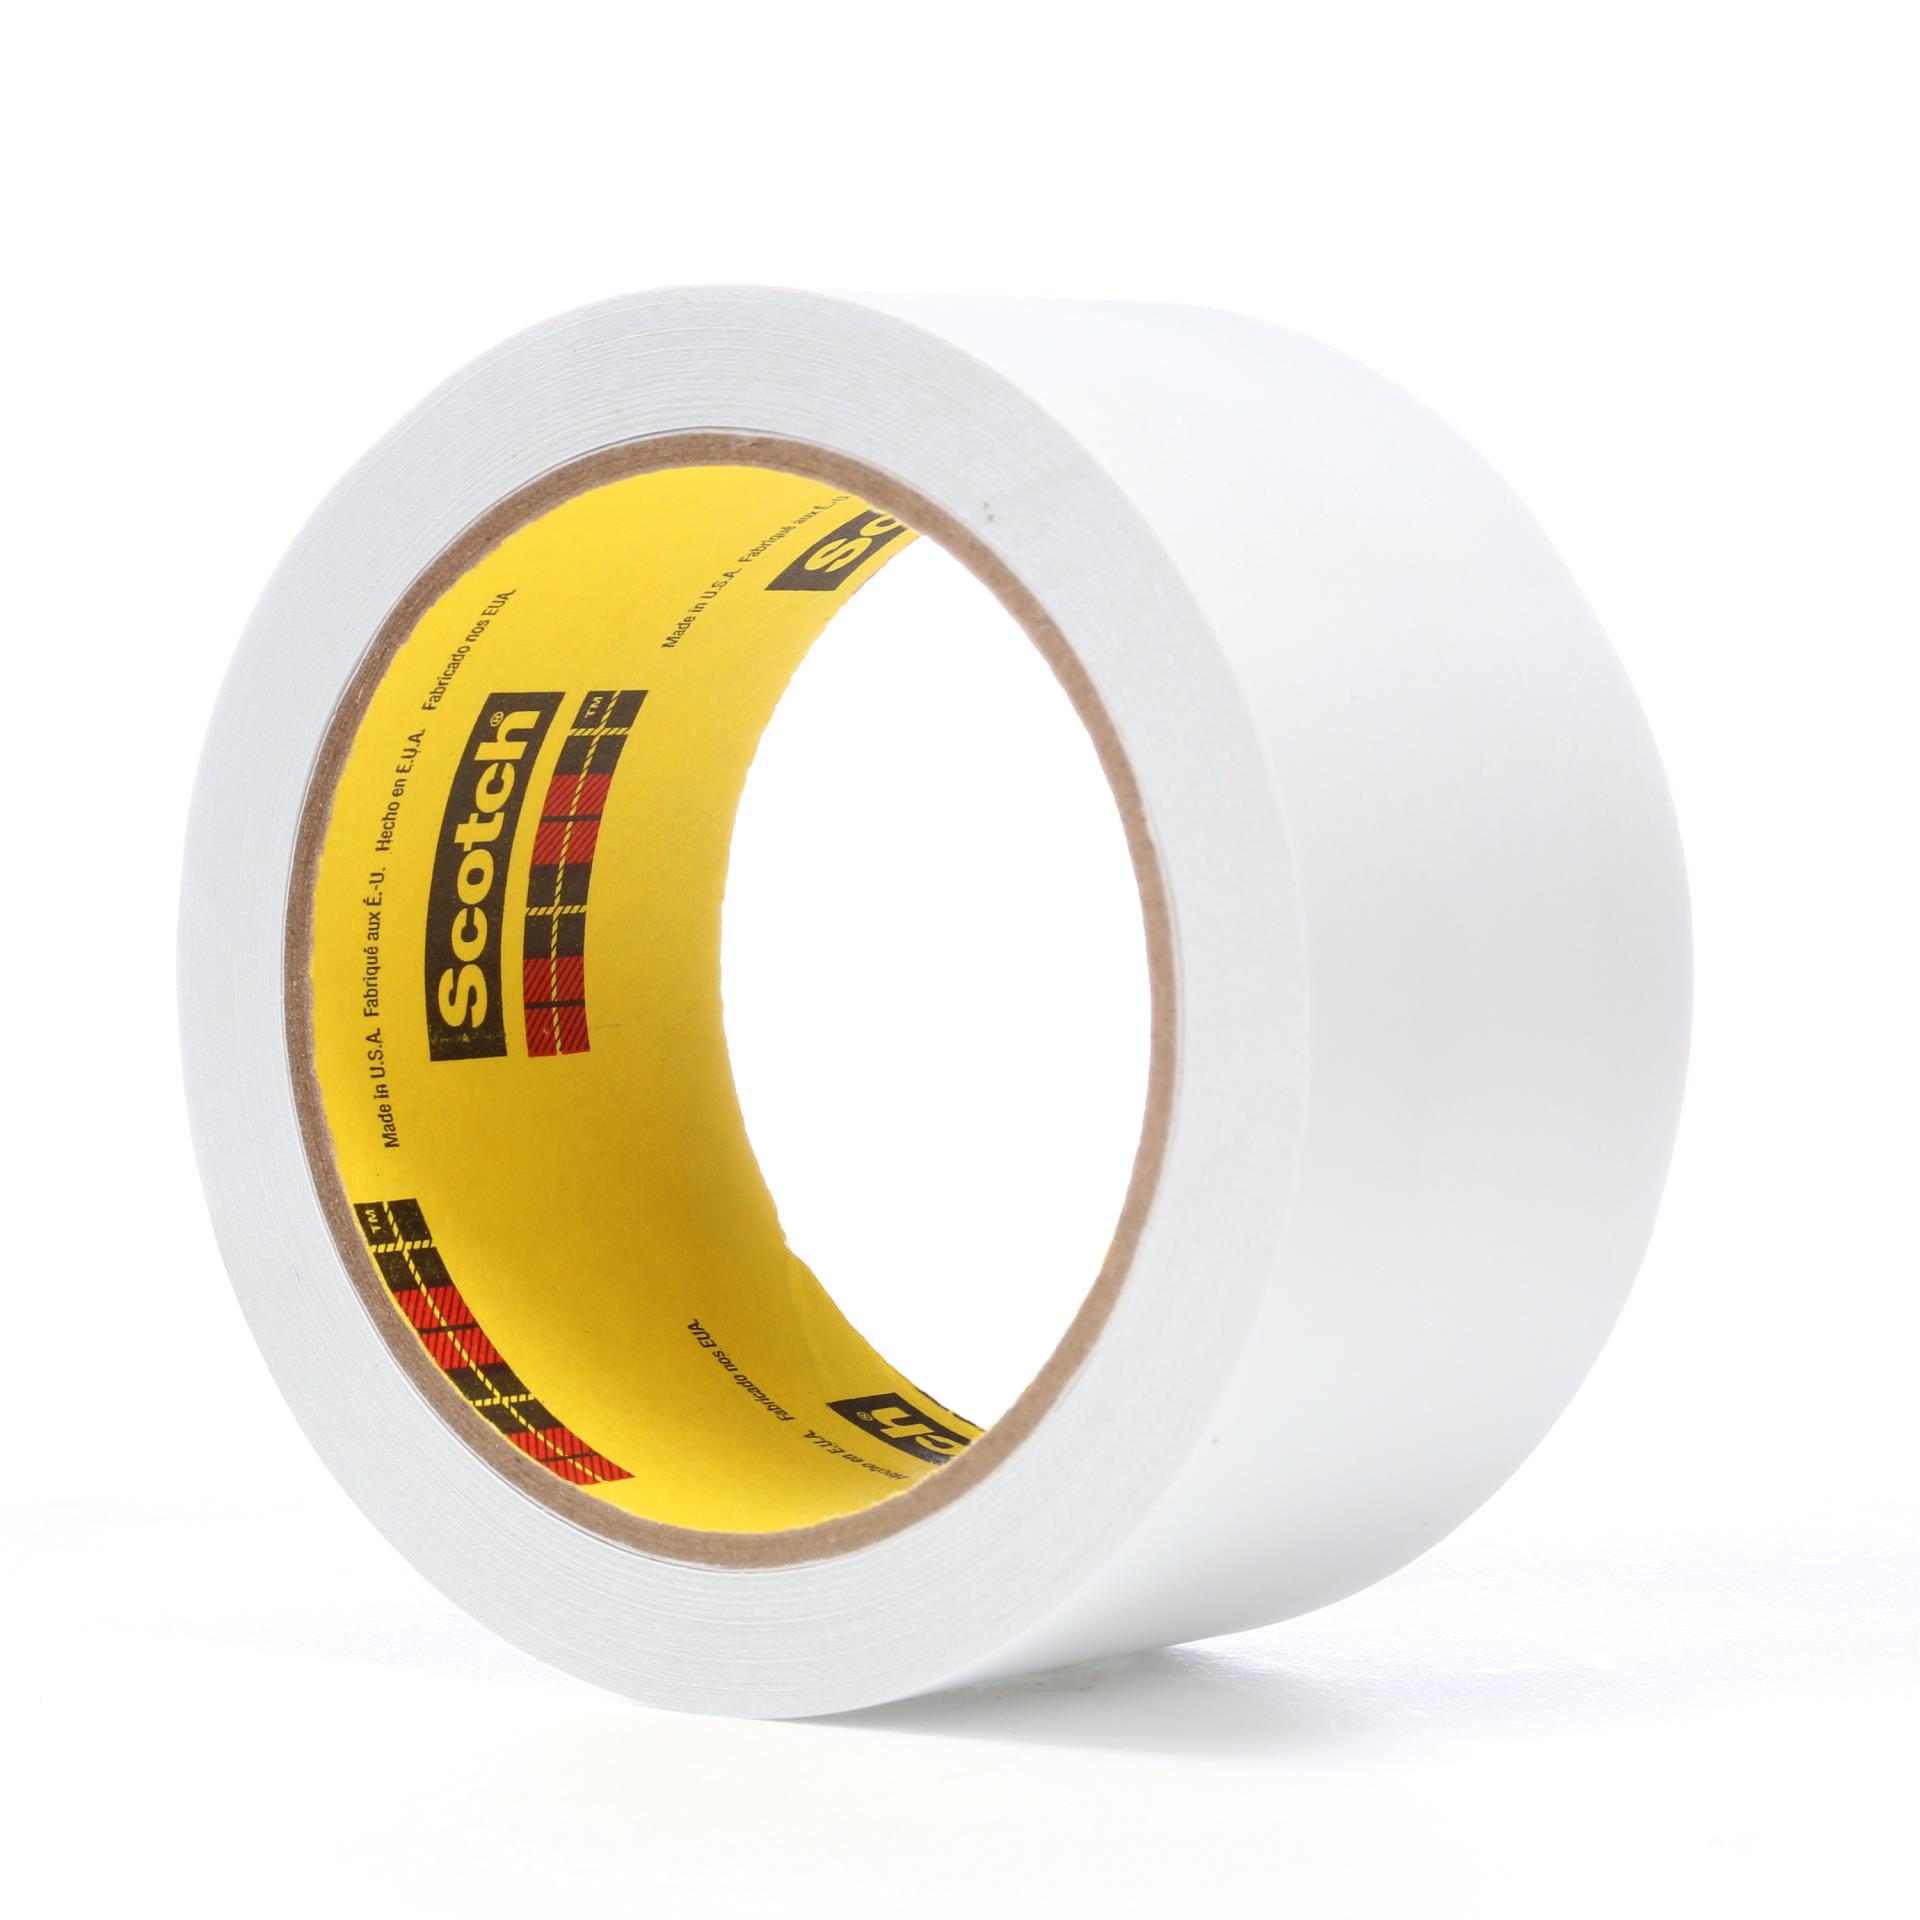 Nitto (Permacel) P-02 Double Coated Kraft Paper Tape: 3/4 in. x 36 yds.  (White)